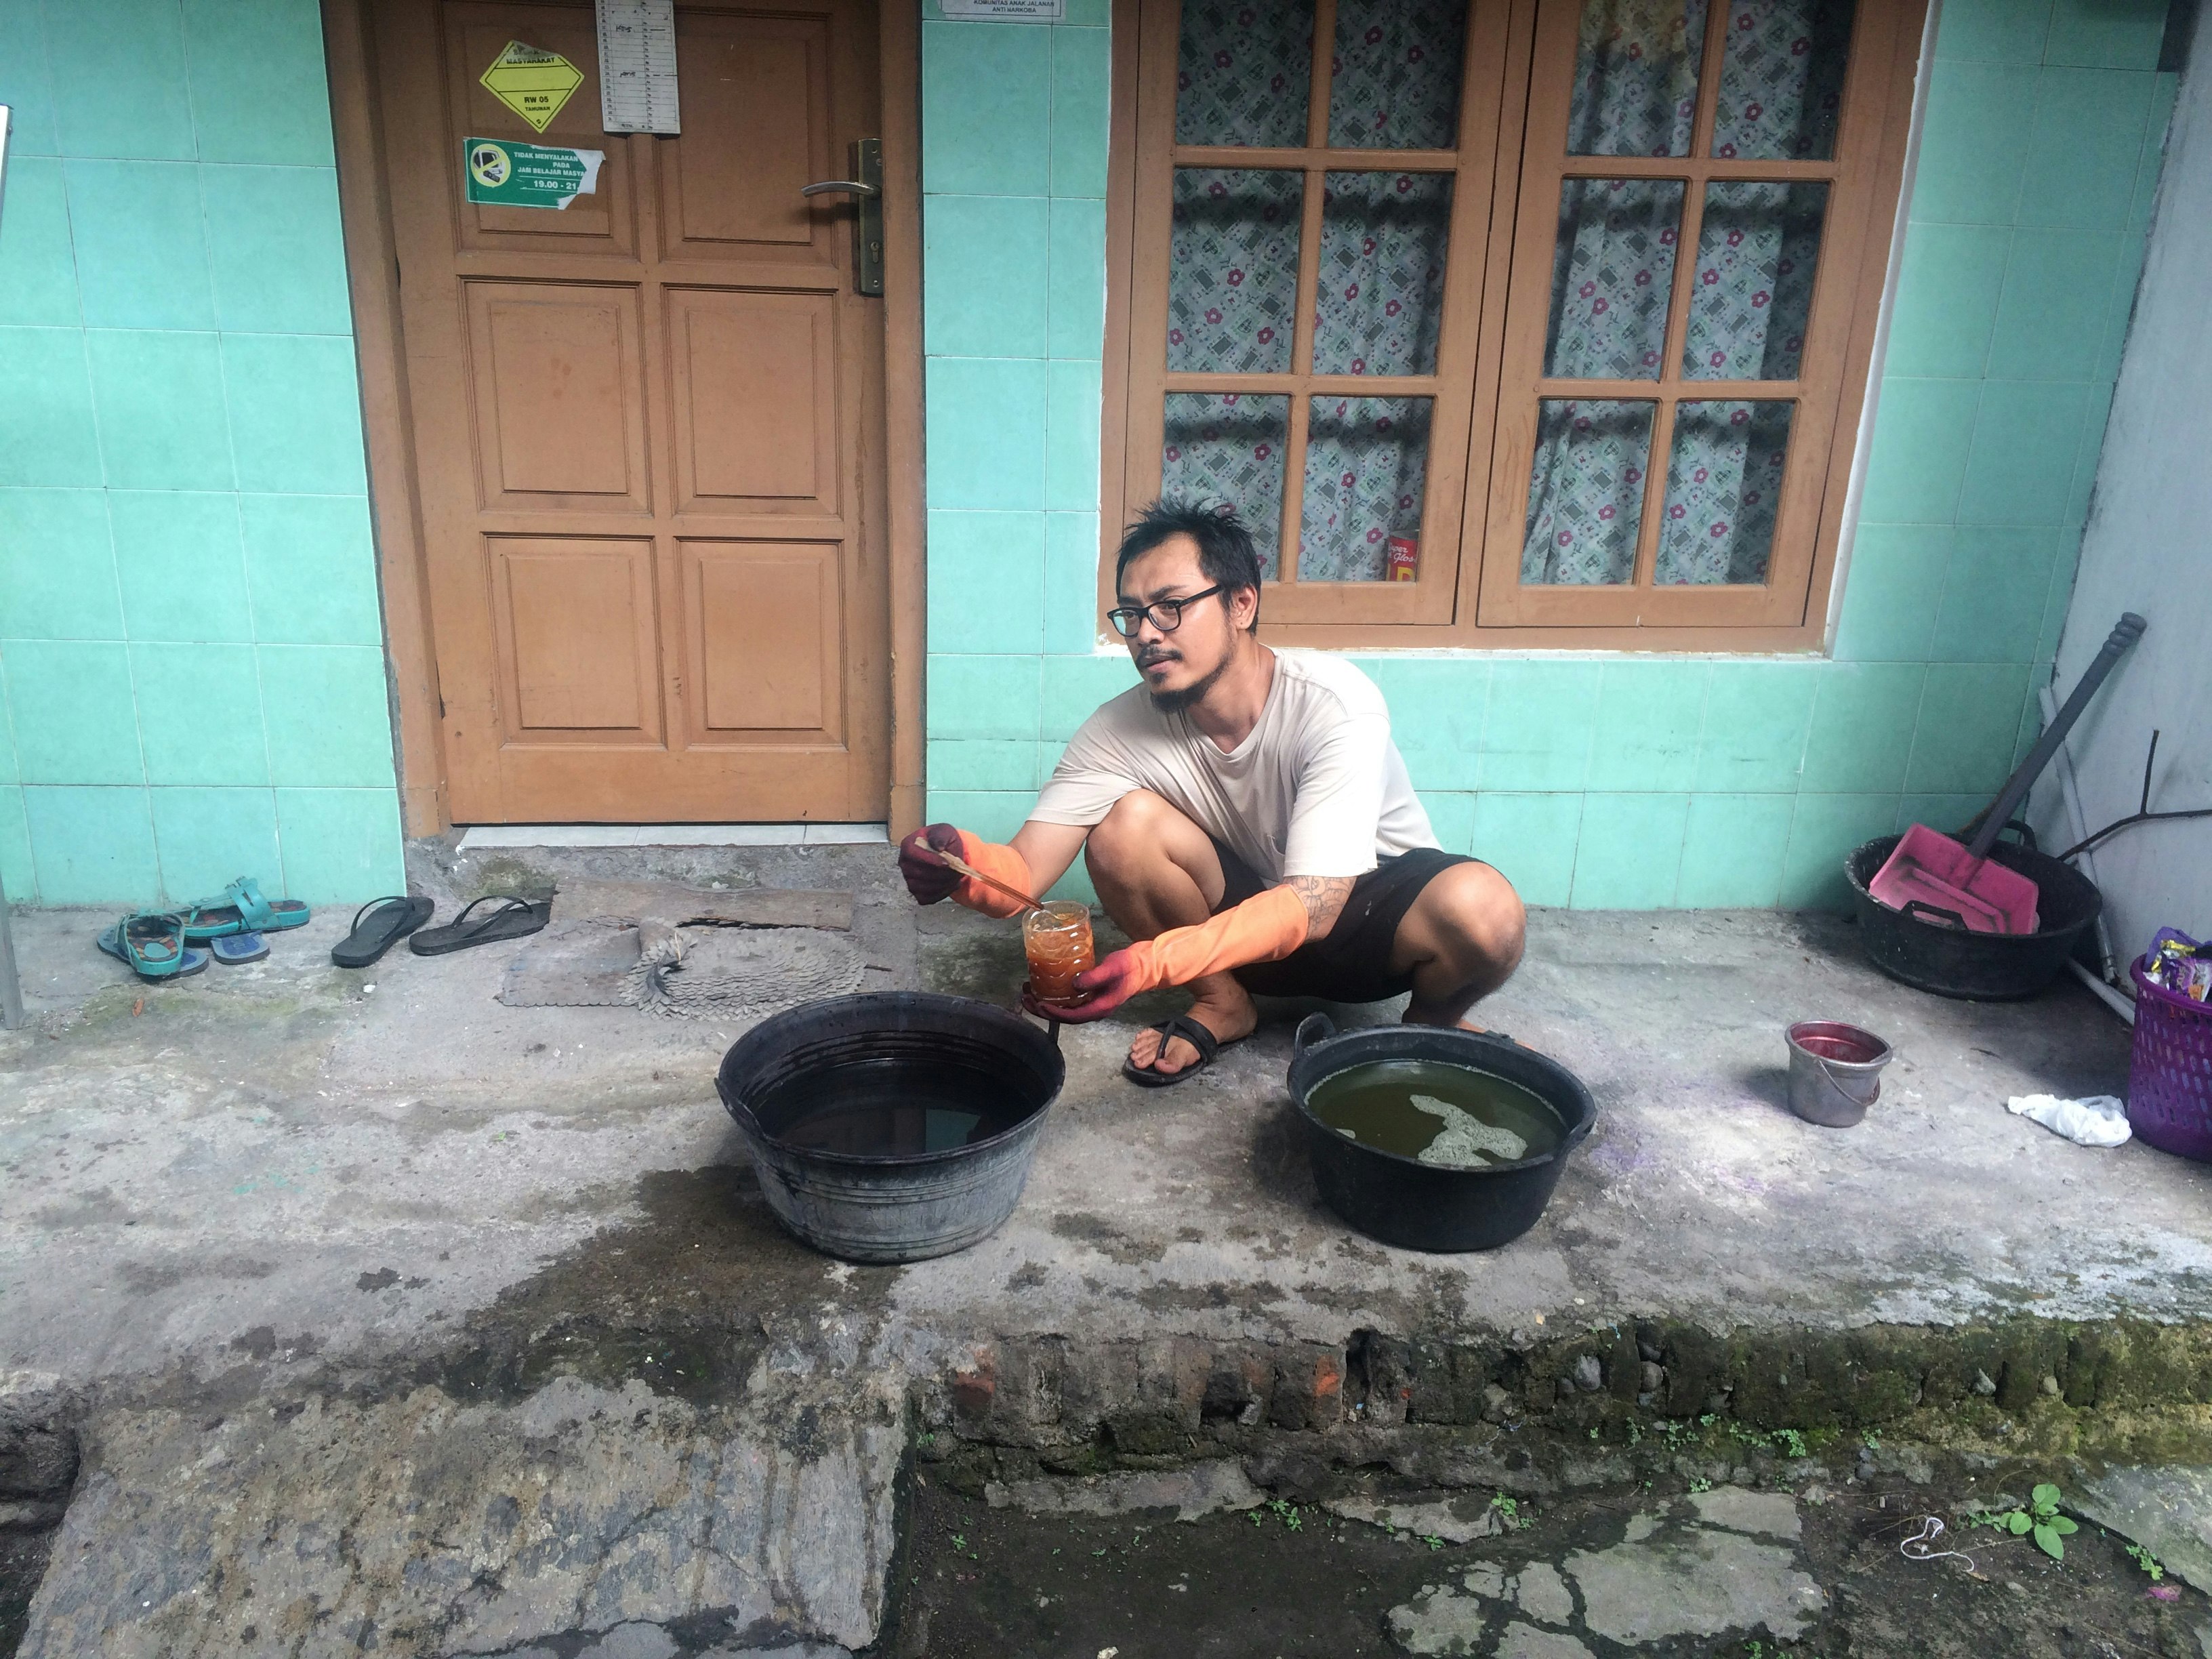 Arwin, a male-presenting Indonesian artist, squats over two tubs of liquid in front of a teal green house.